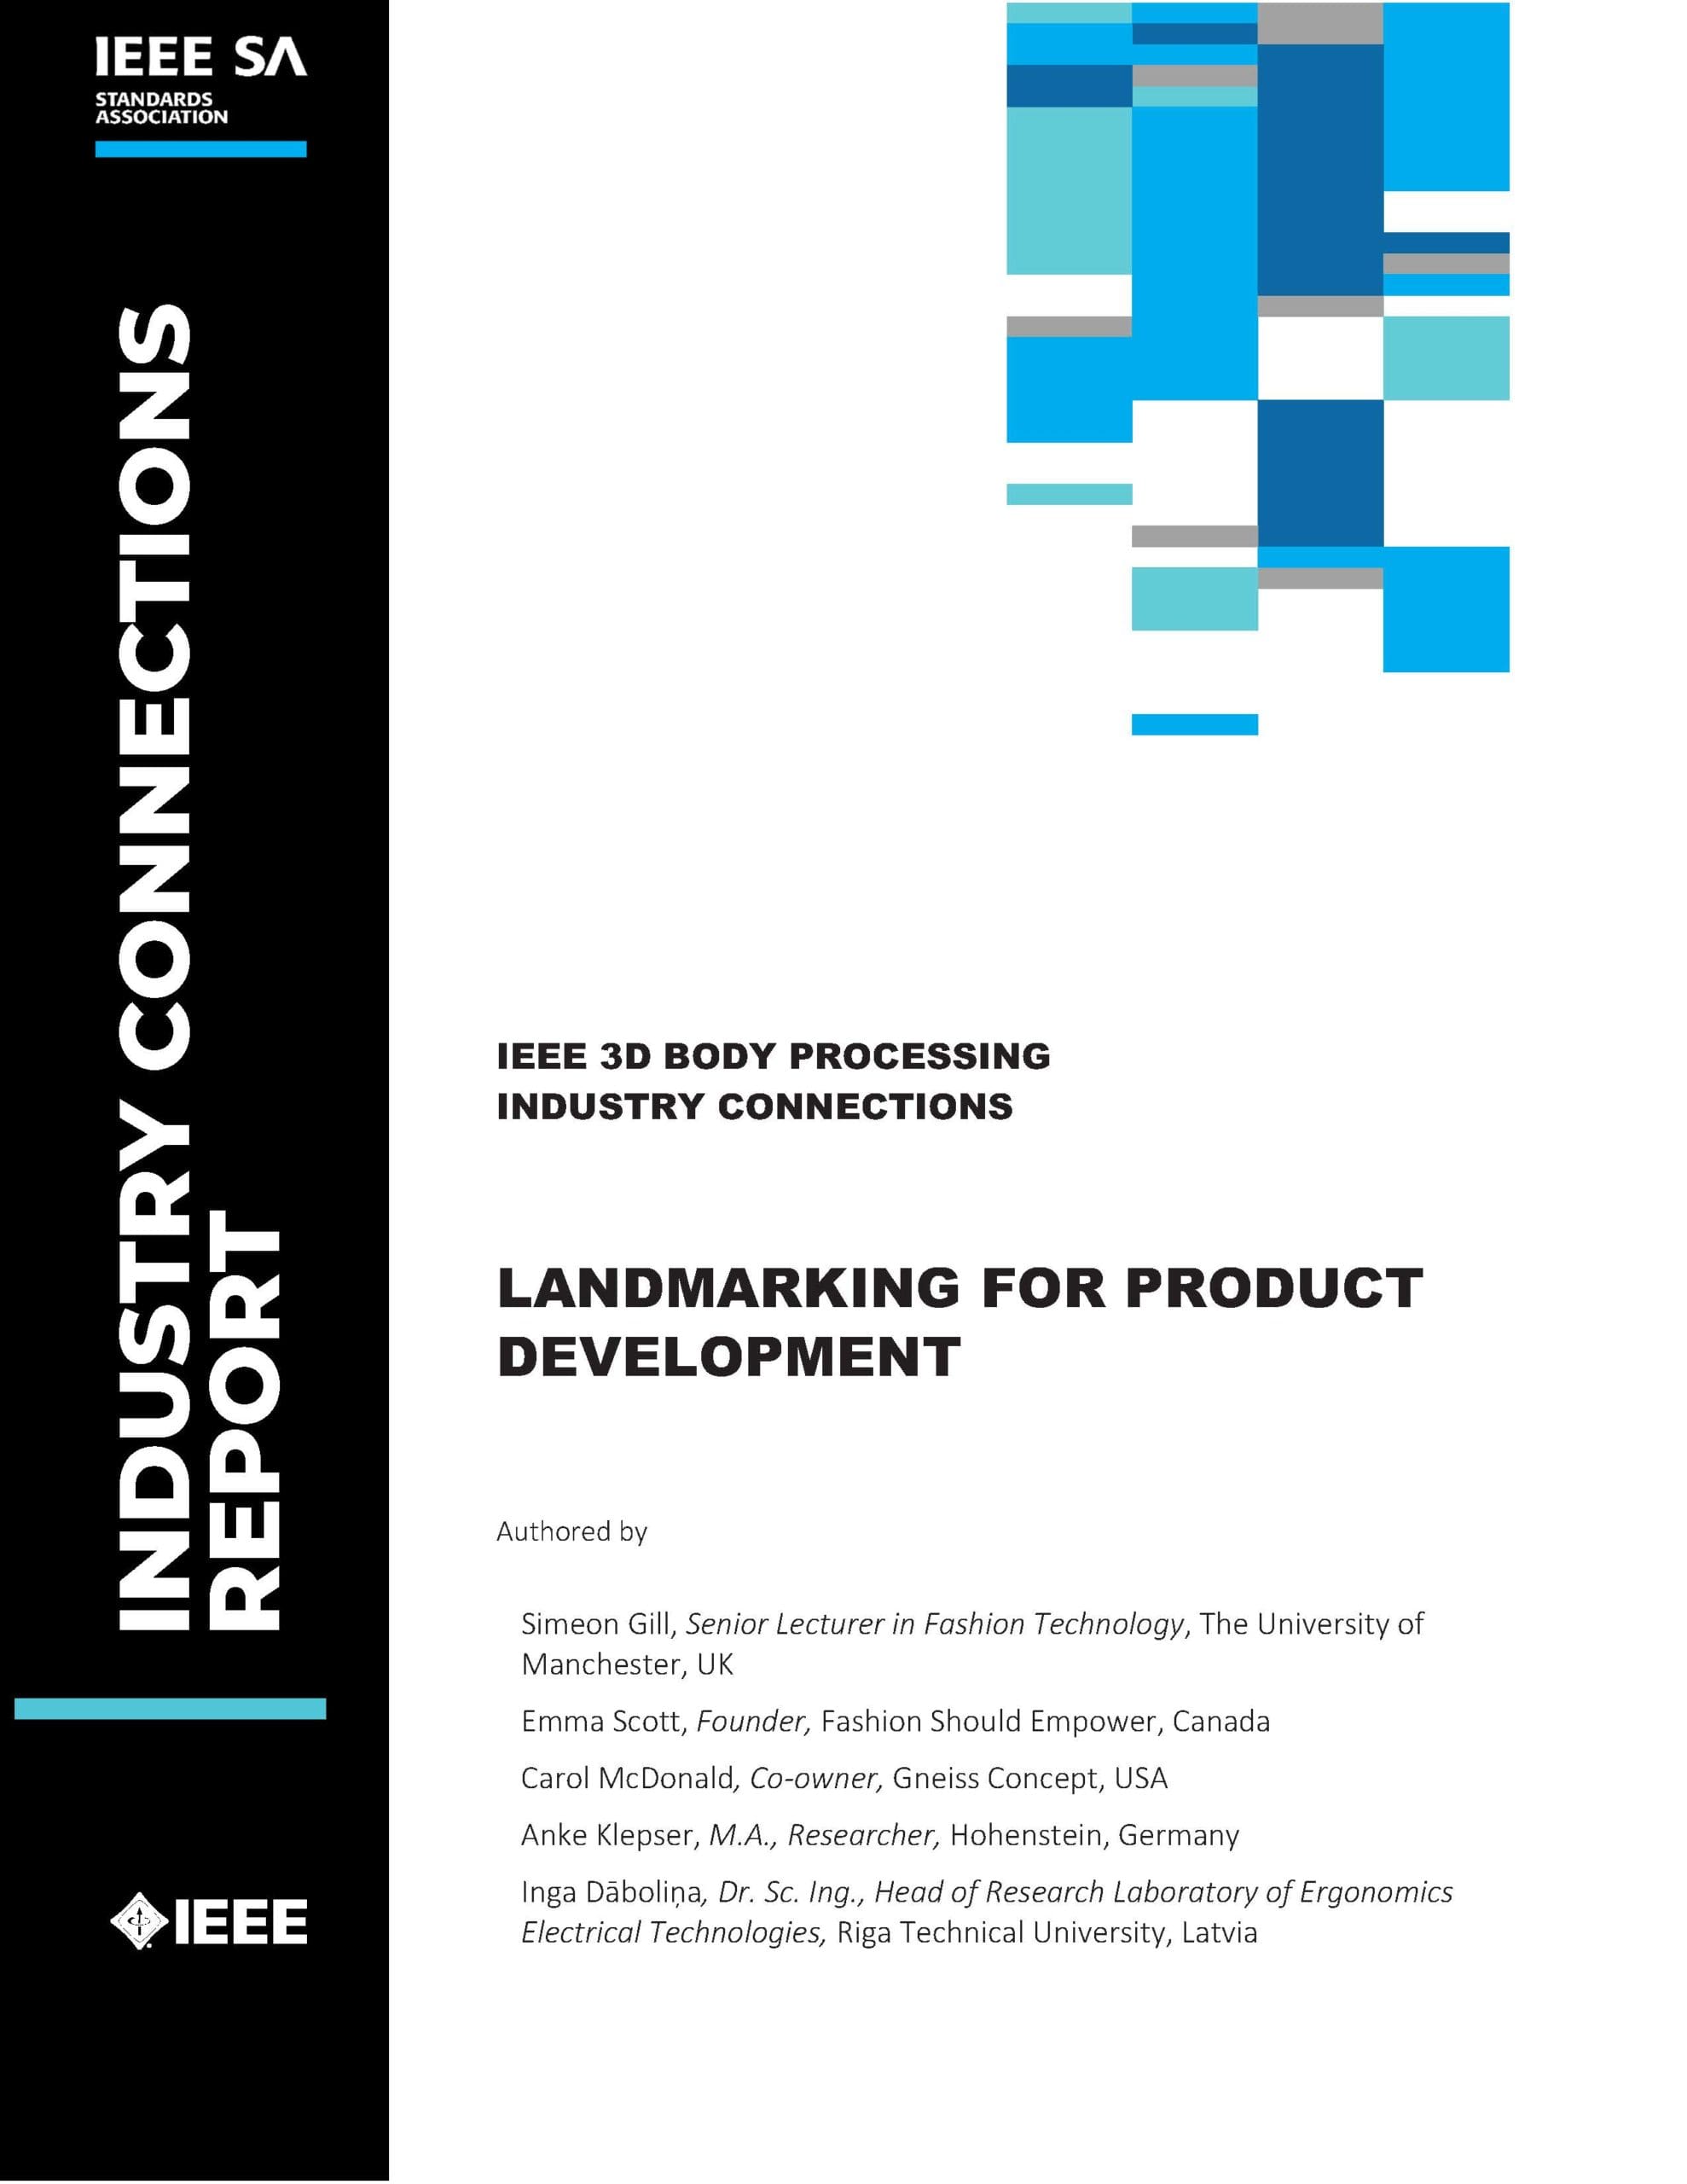 IEEE 3D Body Processing Industry Connections Landmarking for Product Development Whitepaper